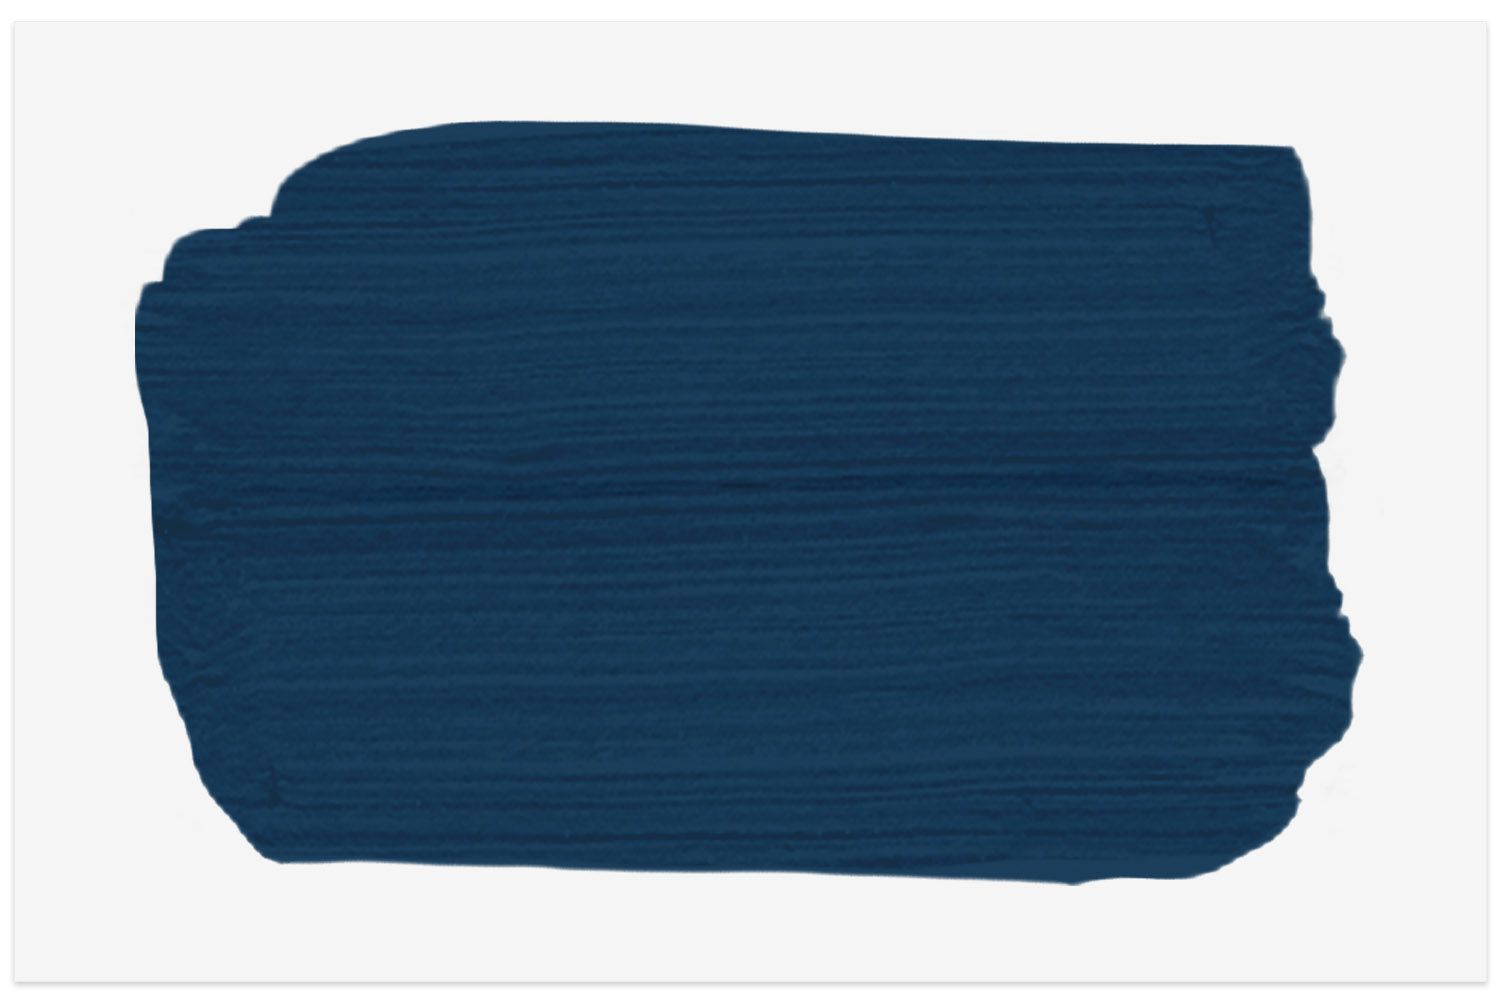 Marine Blue paint swatch from Benjamin Moore